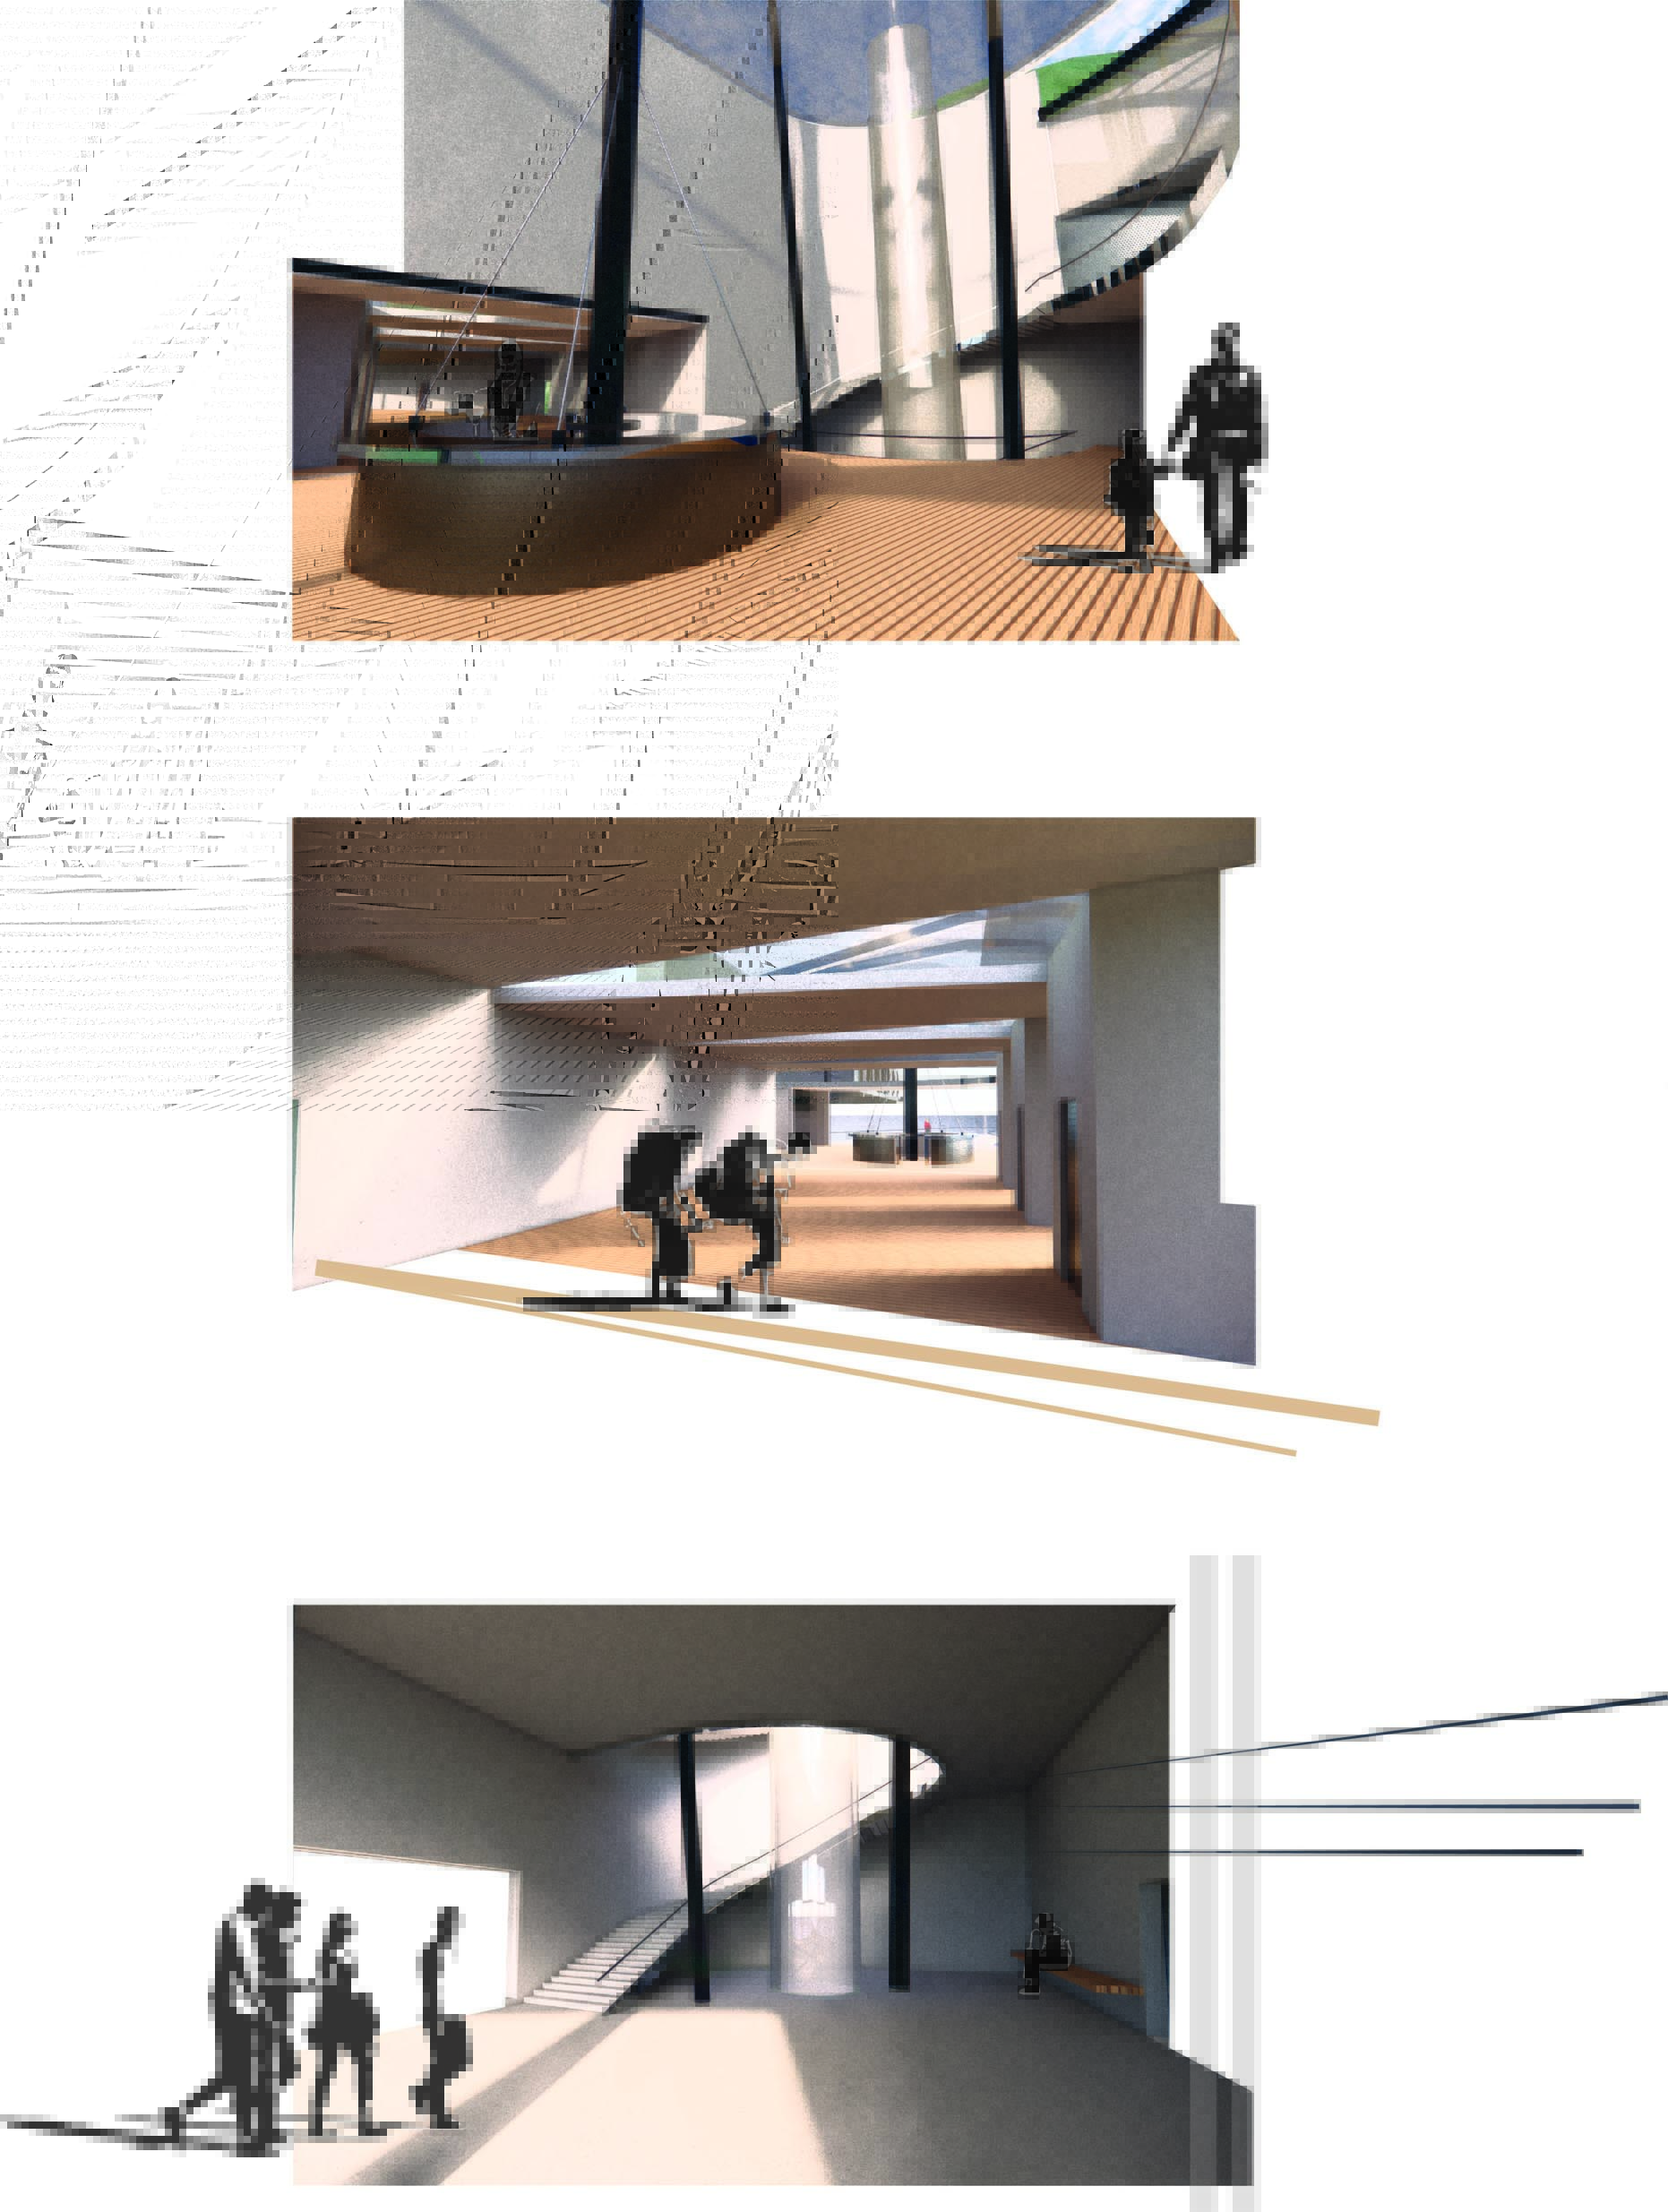 An image showing interior shots showing a few interior spaces, to provide a feel for them from a users perspective.